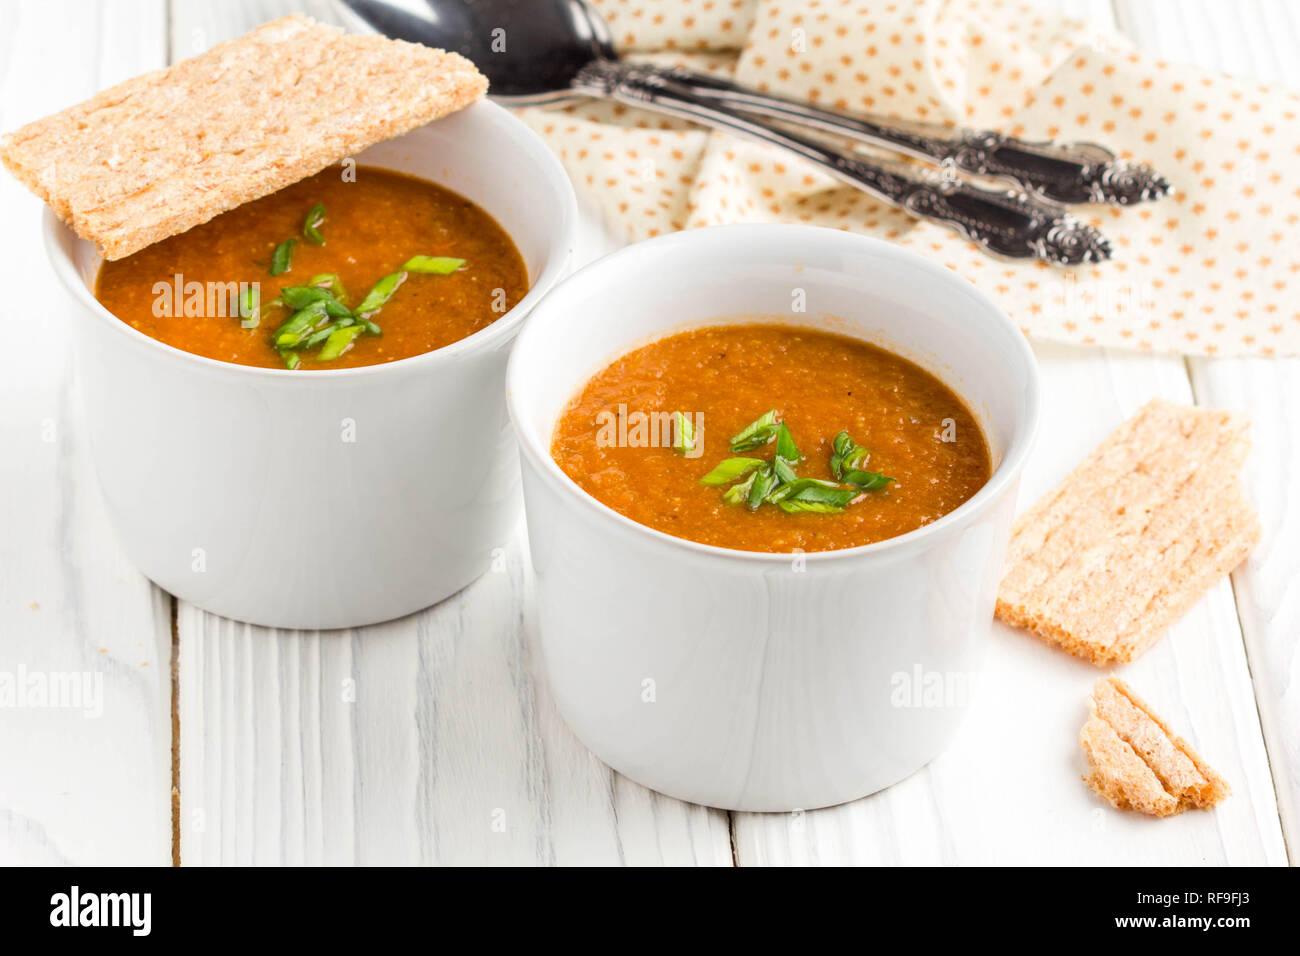 Vegetable cream soup, tomato, carrot, delicious lunch Stock Photo